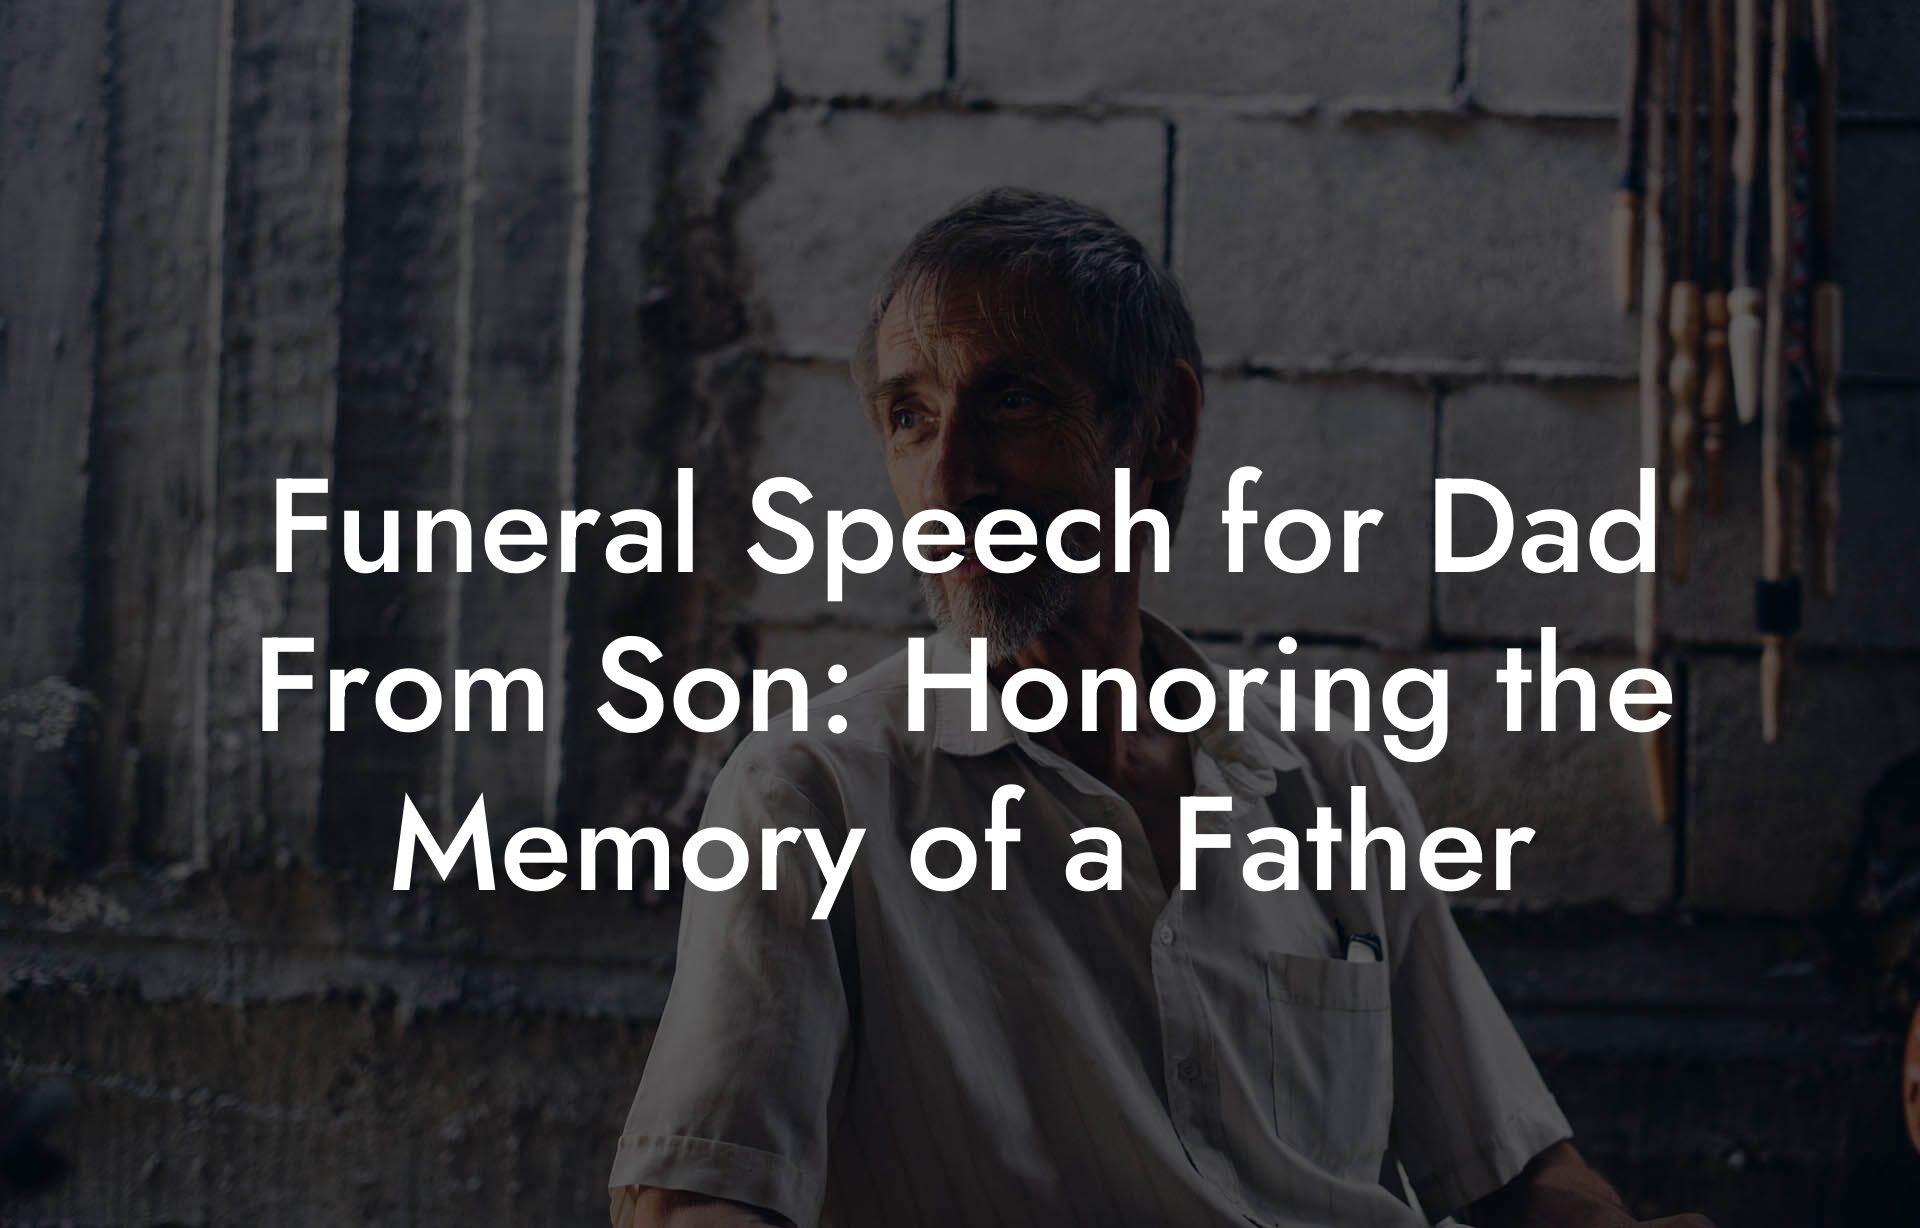 Funeral Speech for Dad From Son: Honoring the Memory of a Father